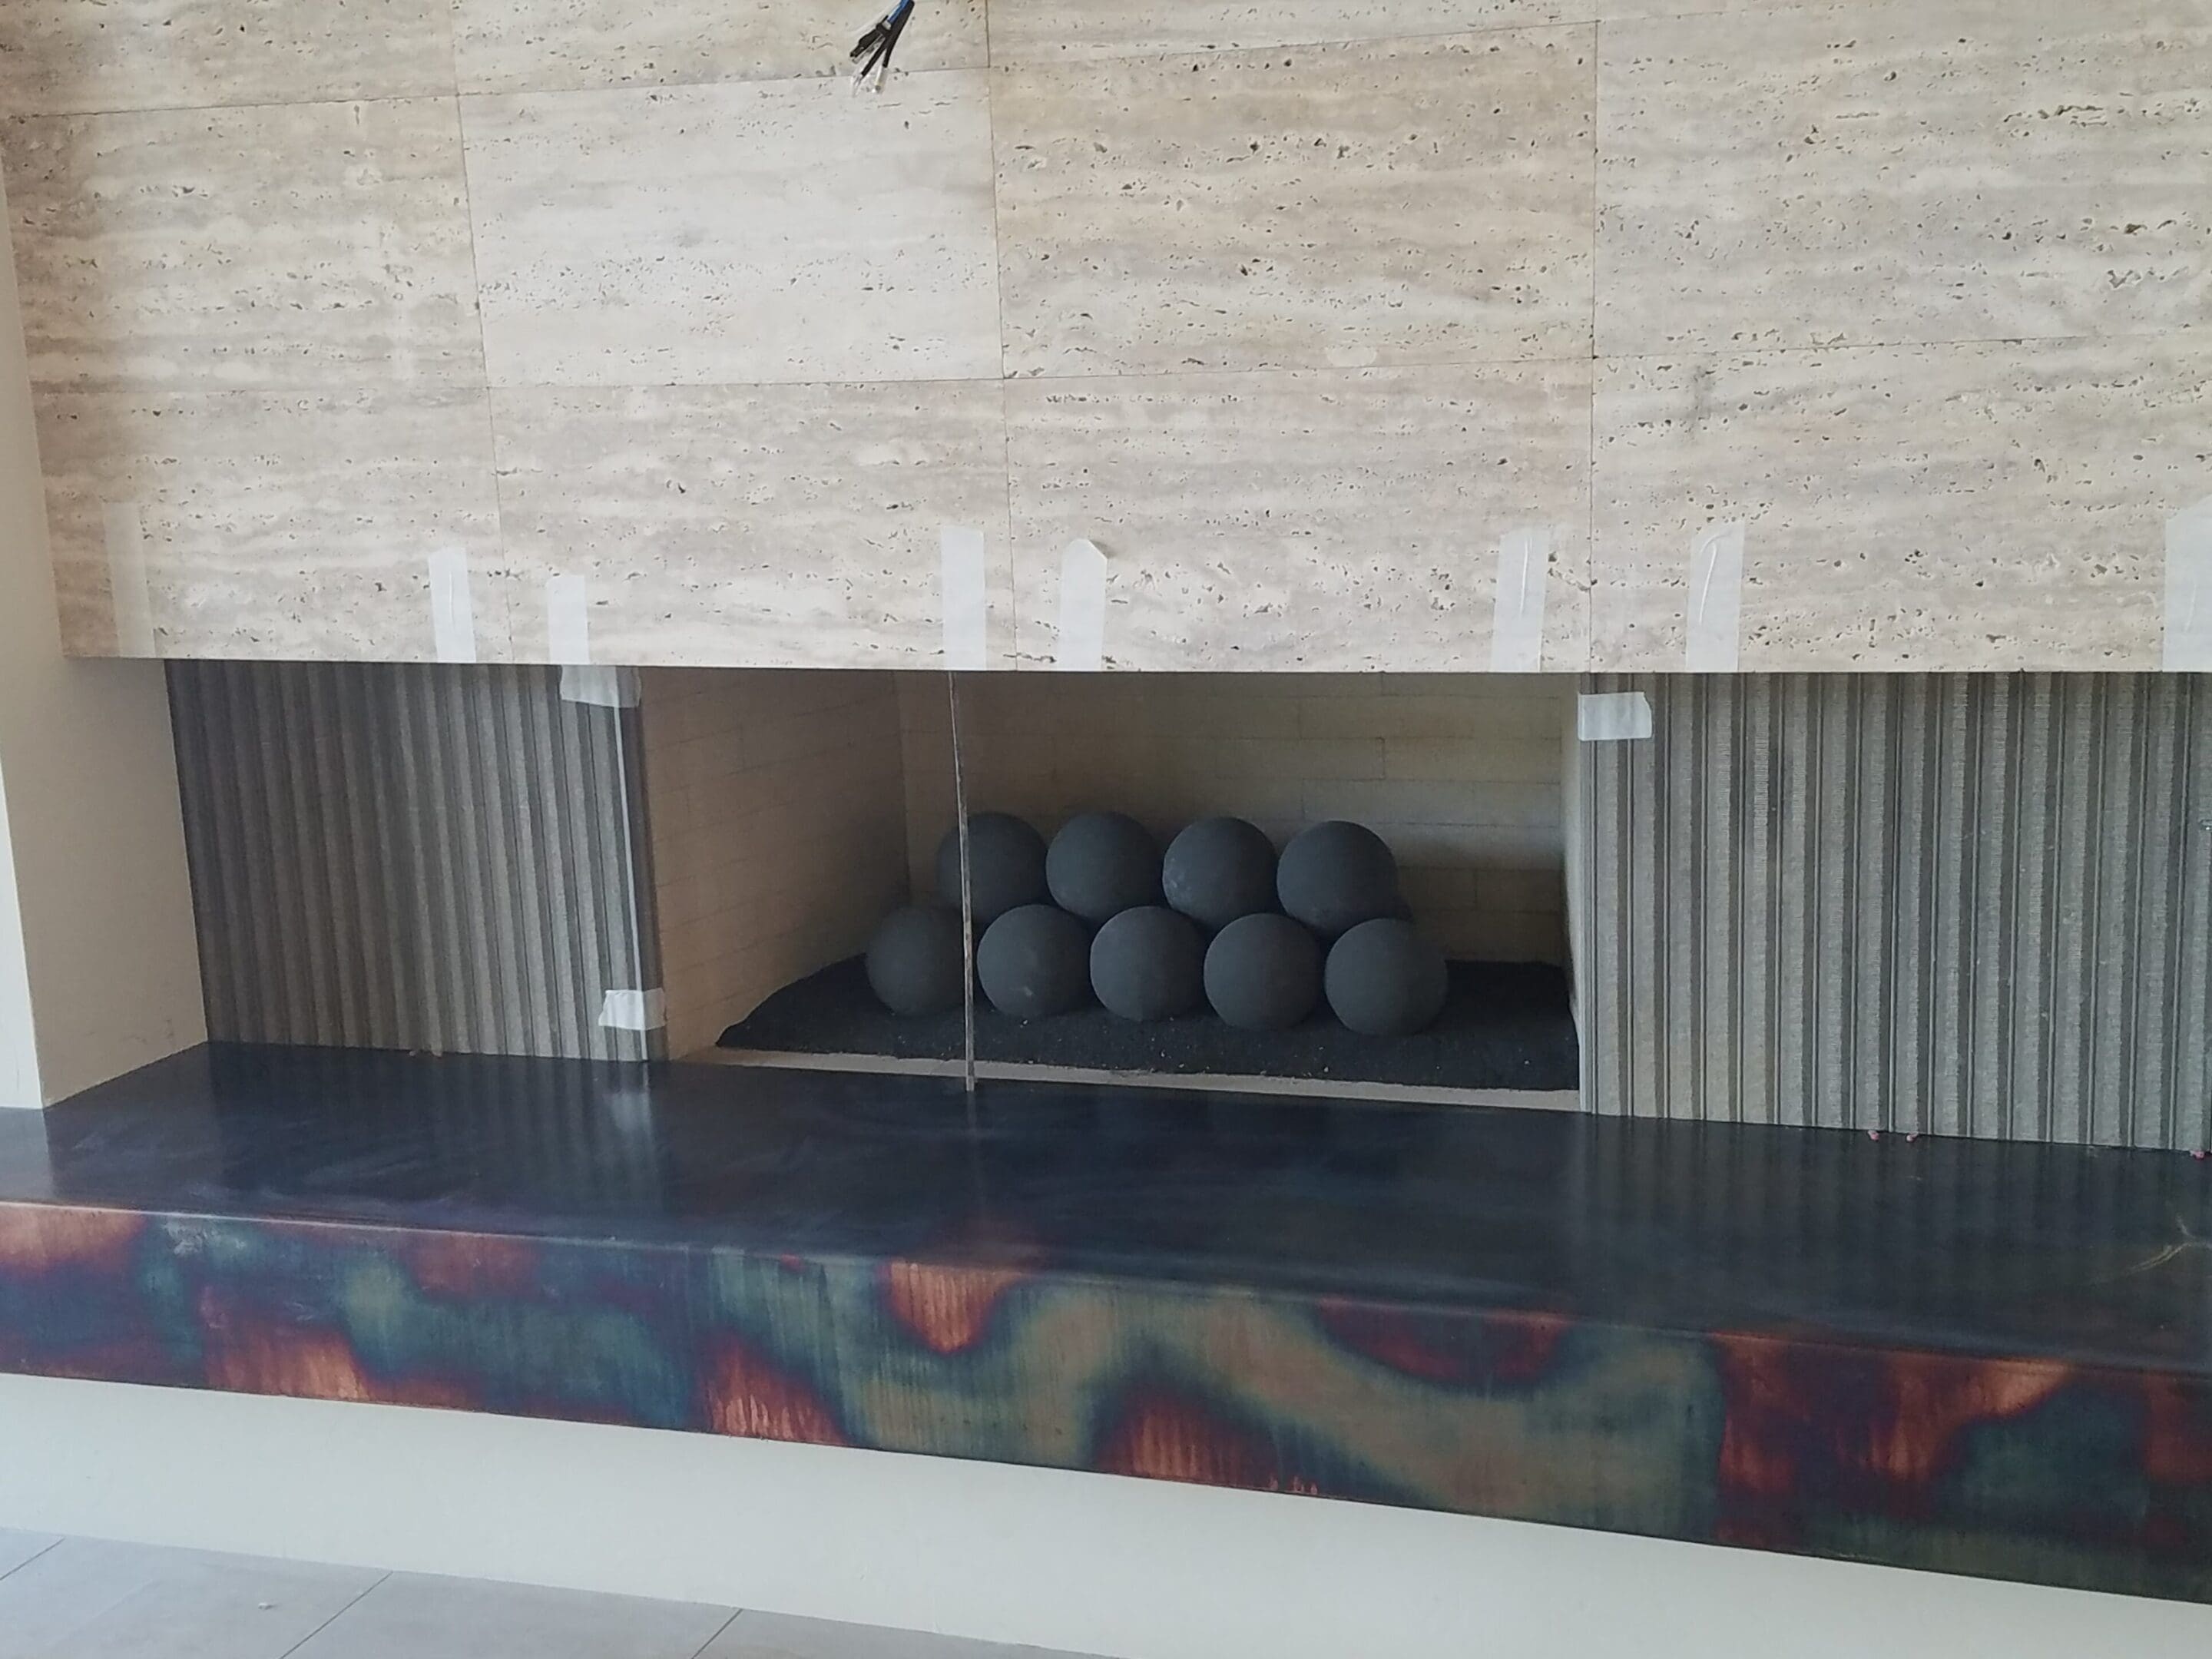 A fireplace with some balls in it